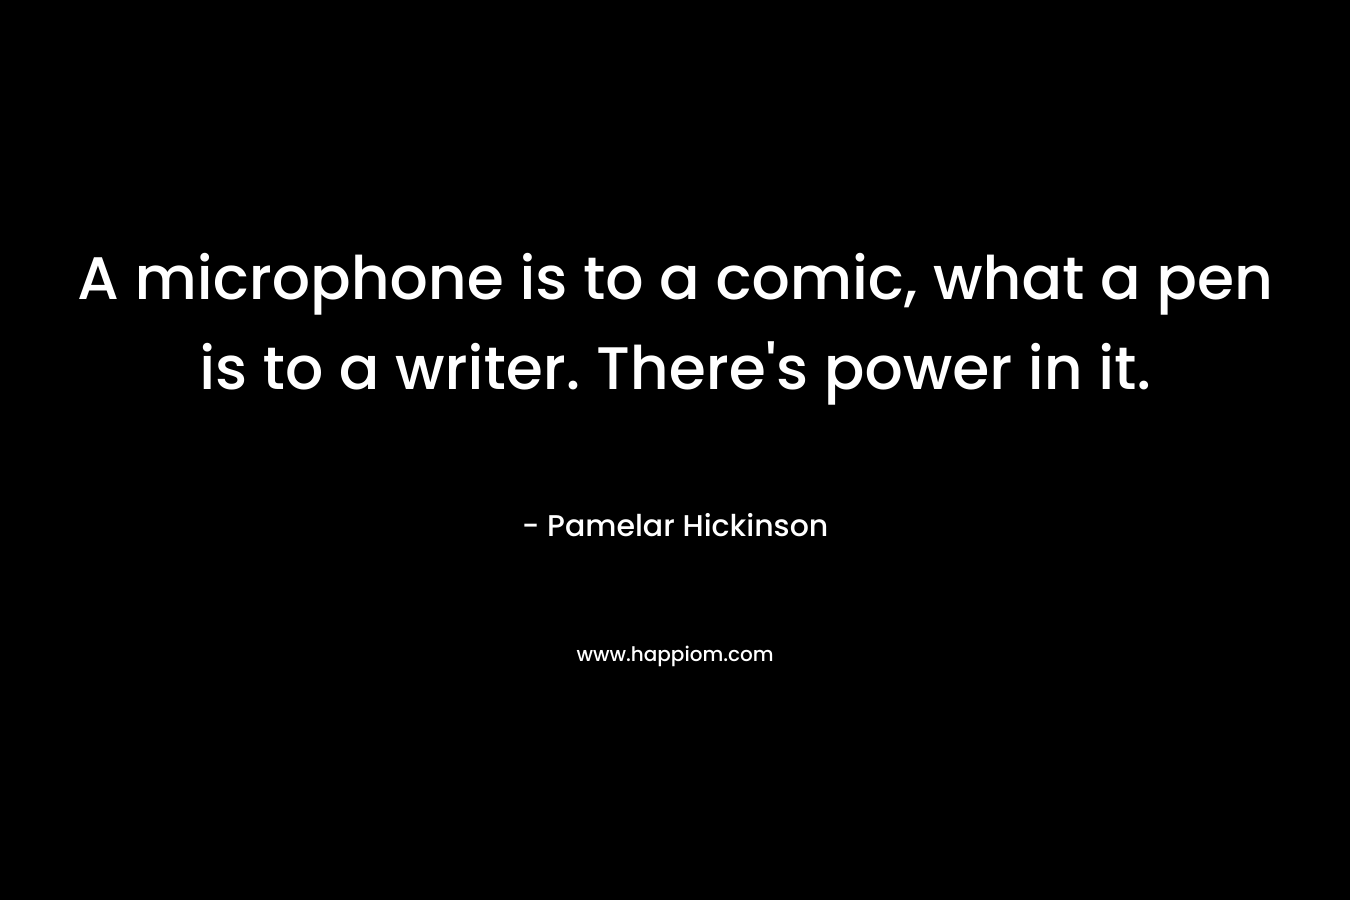 A microphone is to a comic, what a pen is to a writer. There’s power in it. – Pamelar Hickinson